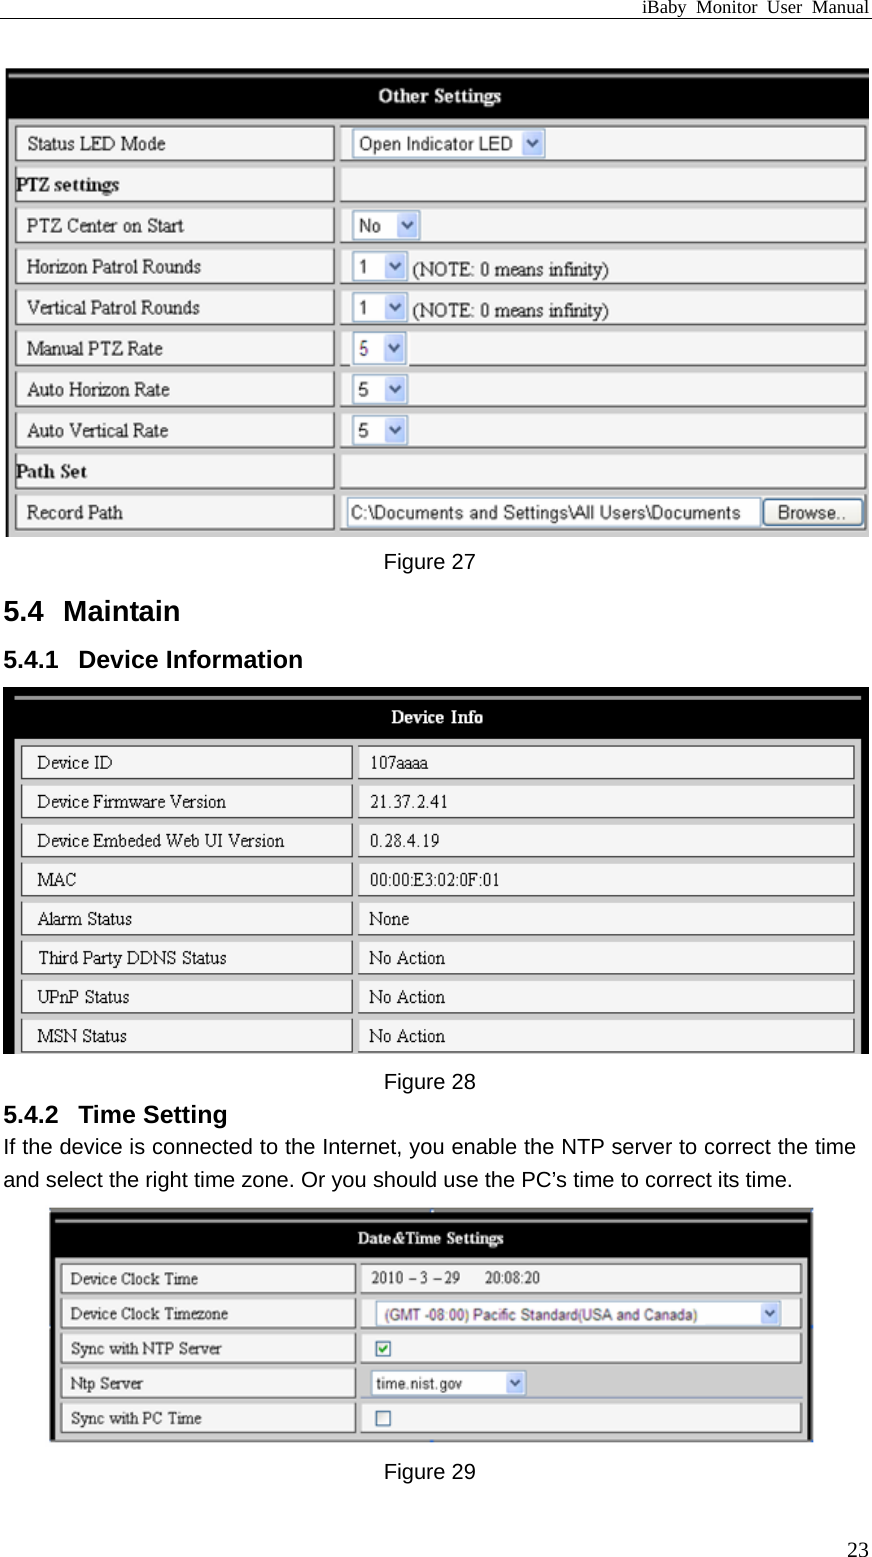 iBaby Monitor User Manual  Figure 27 5.4  Maintain 5.4.1  Device Information  Figure 28 5.4.2  Time Setting If the device is connected to the Internet, you enable the NTP server to correct the time and select the right time zone. Or you should use the PC’s time to correct its time.  Figure 29  23